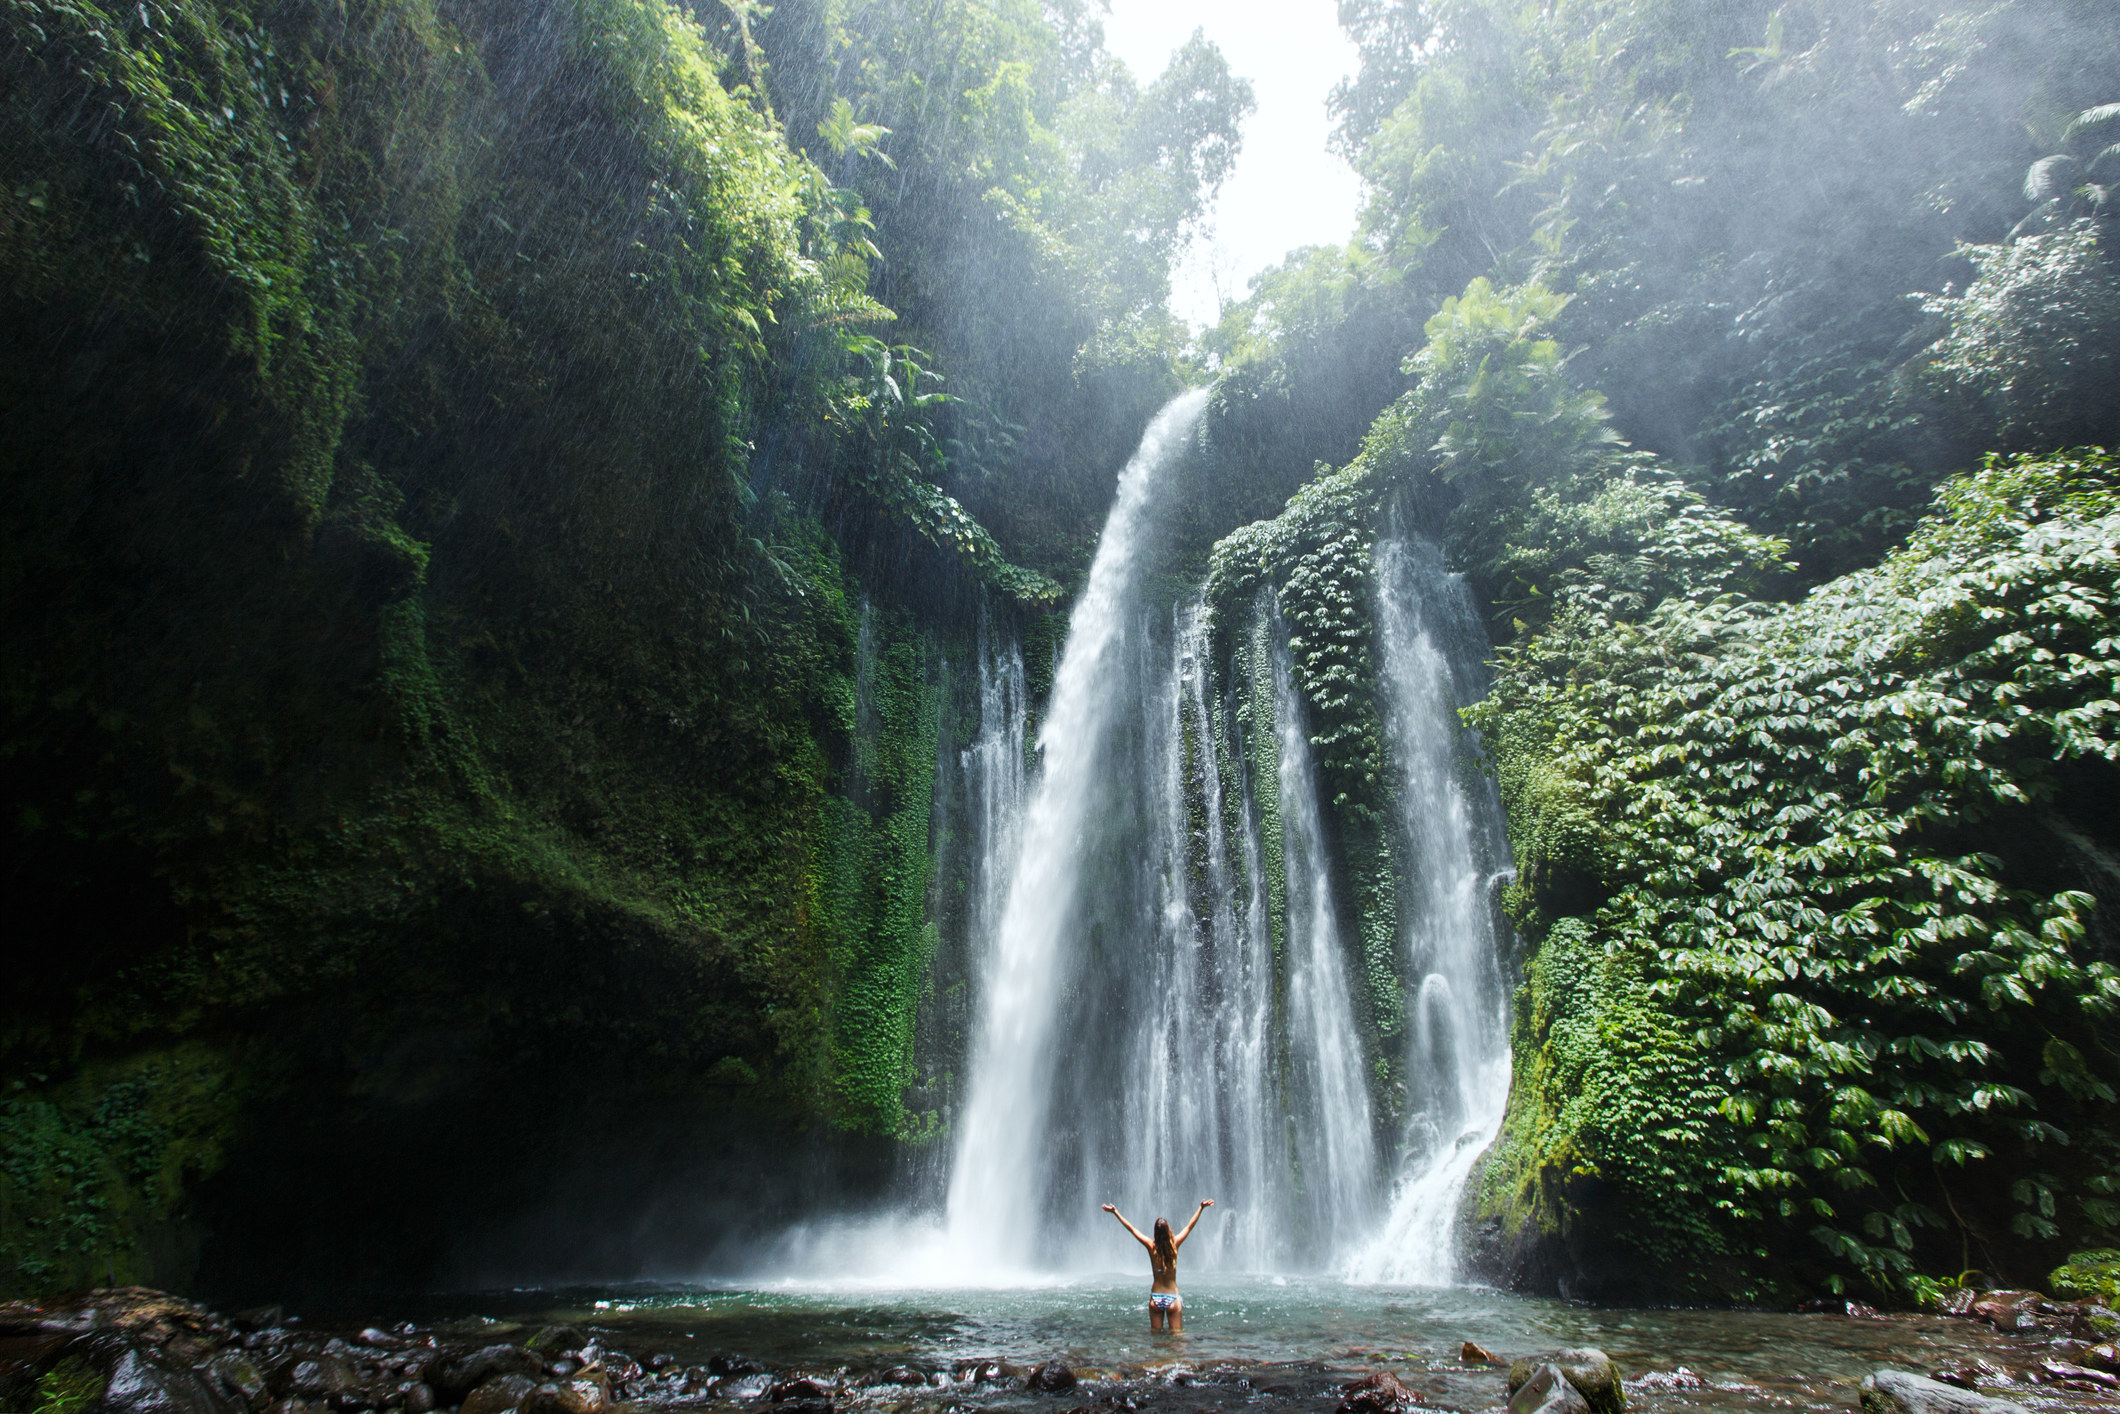 A waterfall surrounded by lush greenery.